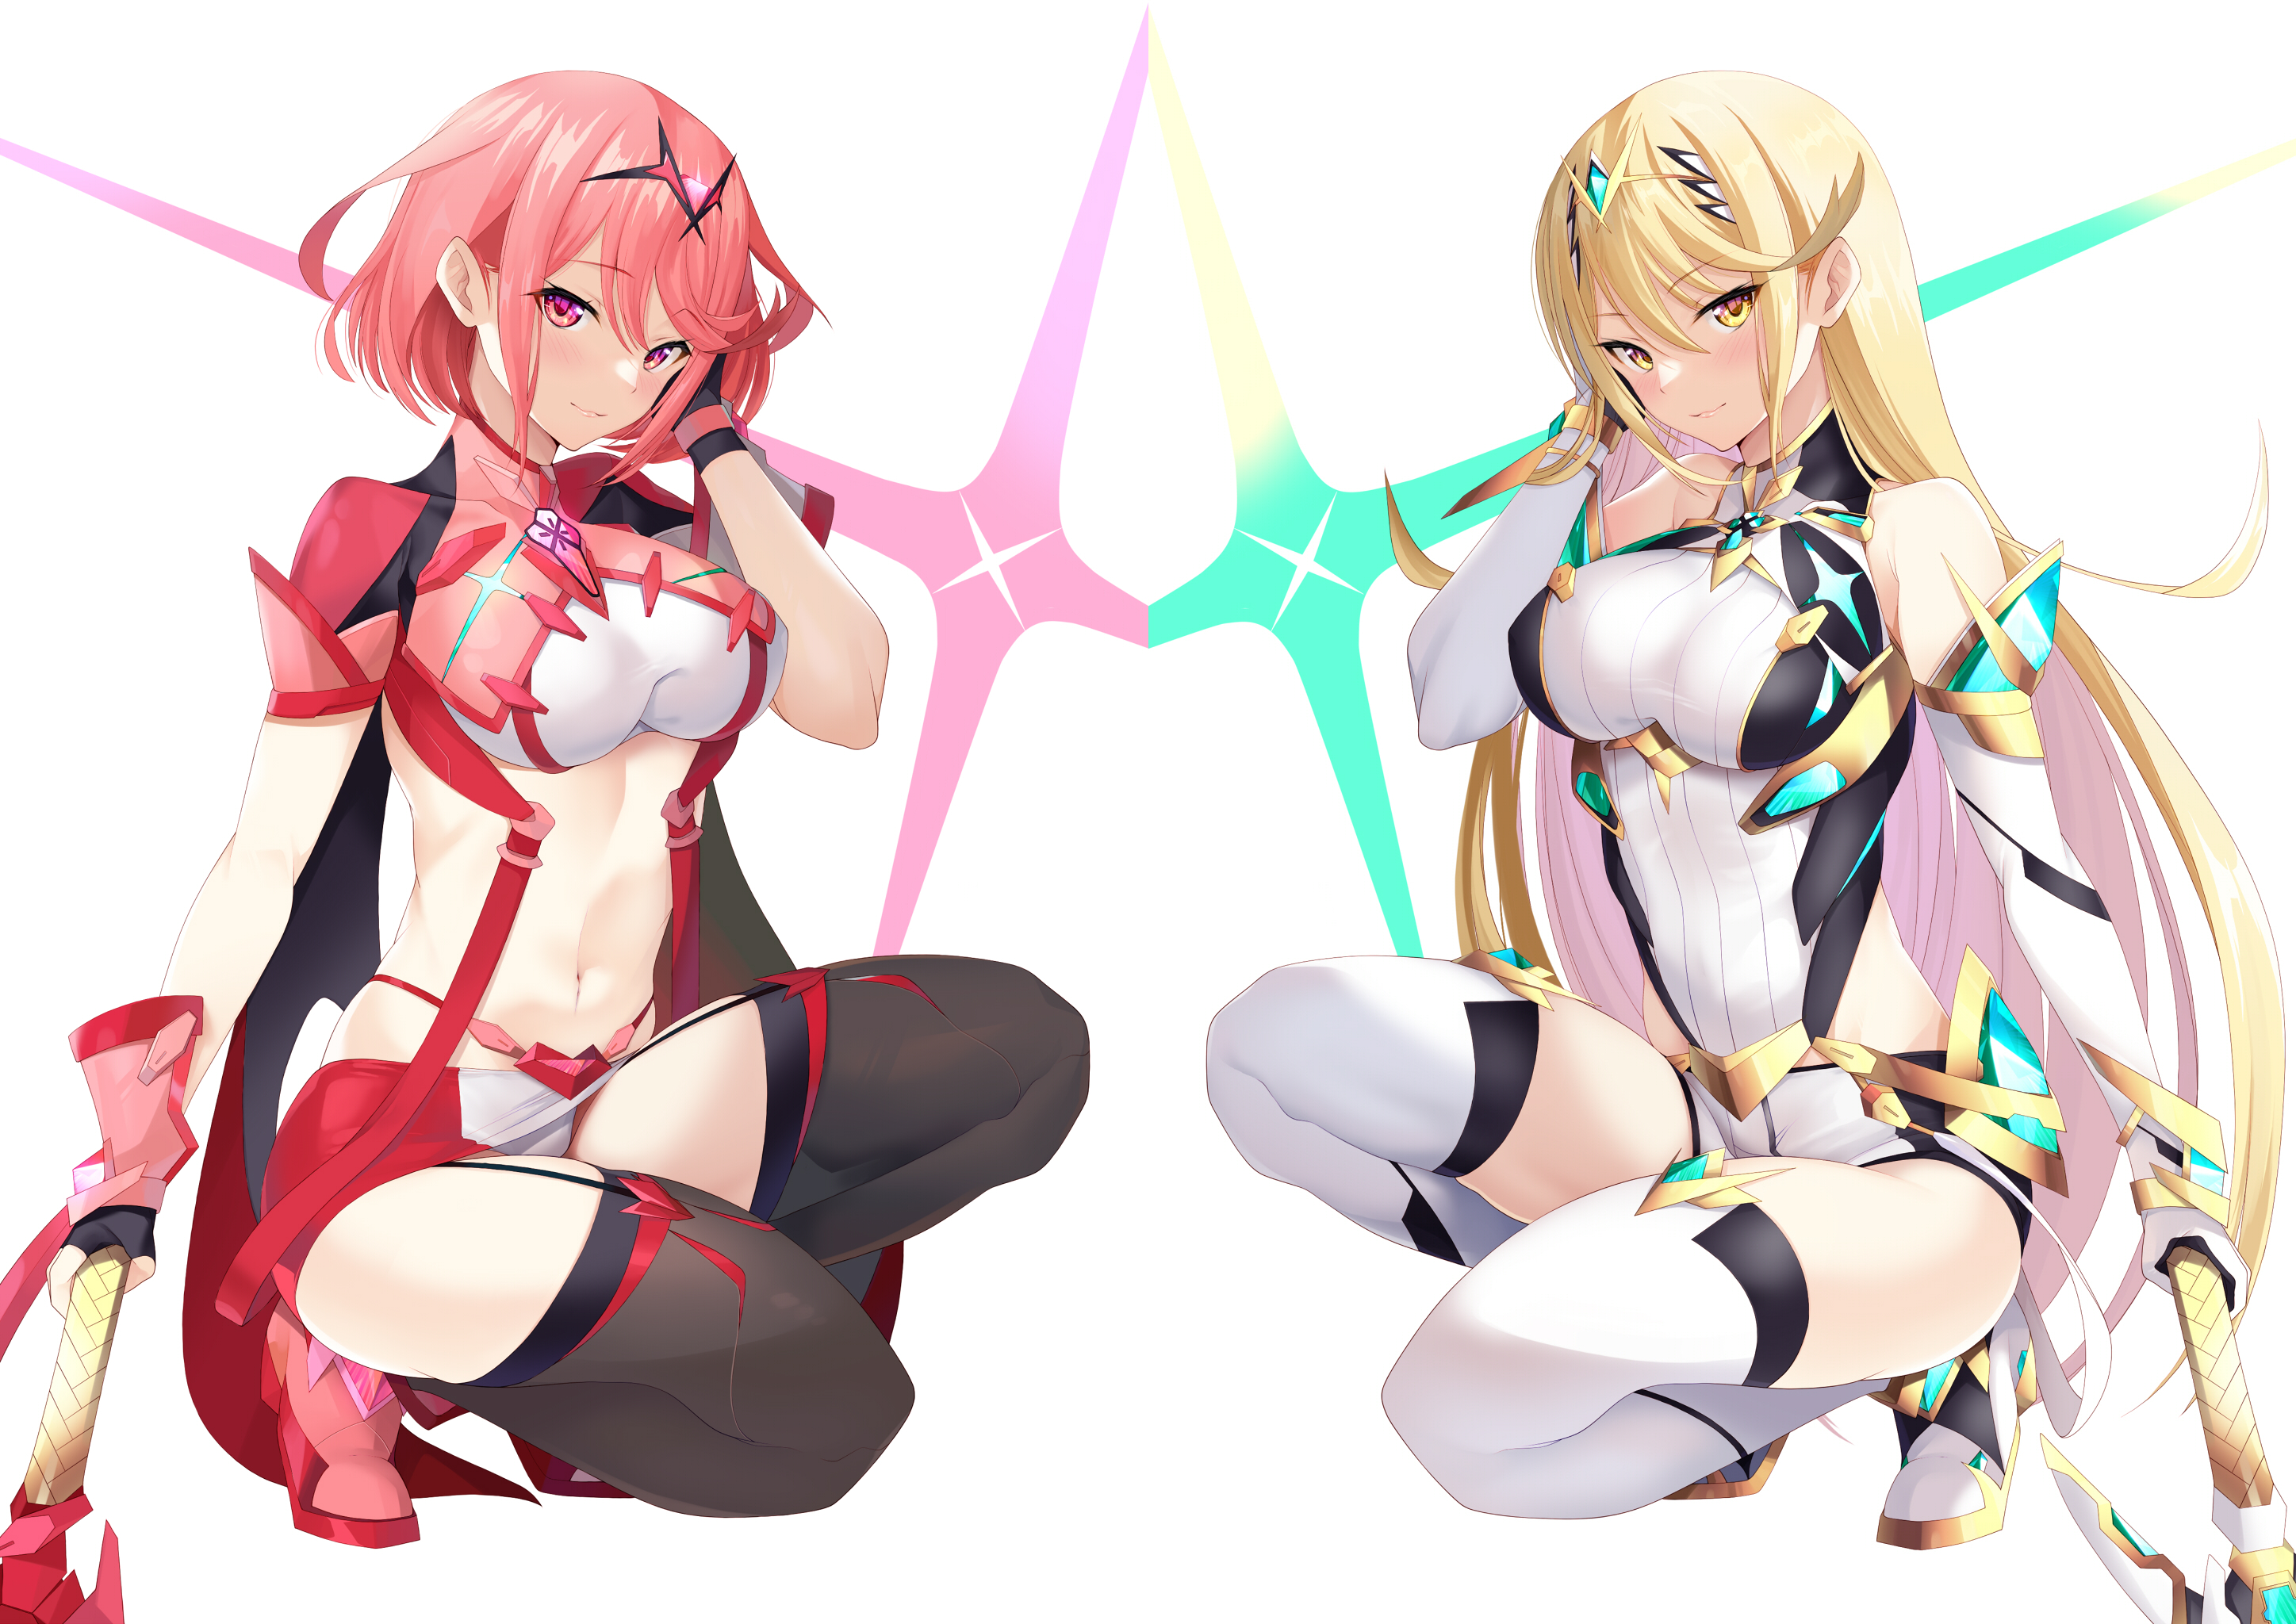 Anime 2895x2048 anime anime girls Xenoblade Chronicles Xenoblade Chronicles 2 Homura (Xenoblade 2) Hikari (Xenoblade Chronicles 2) redhead long hair blonde two women artwork digital art fan art video game girls anime games video games shoulder length hair boobs big boobs curvy stockings white stockings black stockings lingerie looking at viewer white background hair in face pink eyes yellow eyes belly